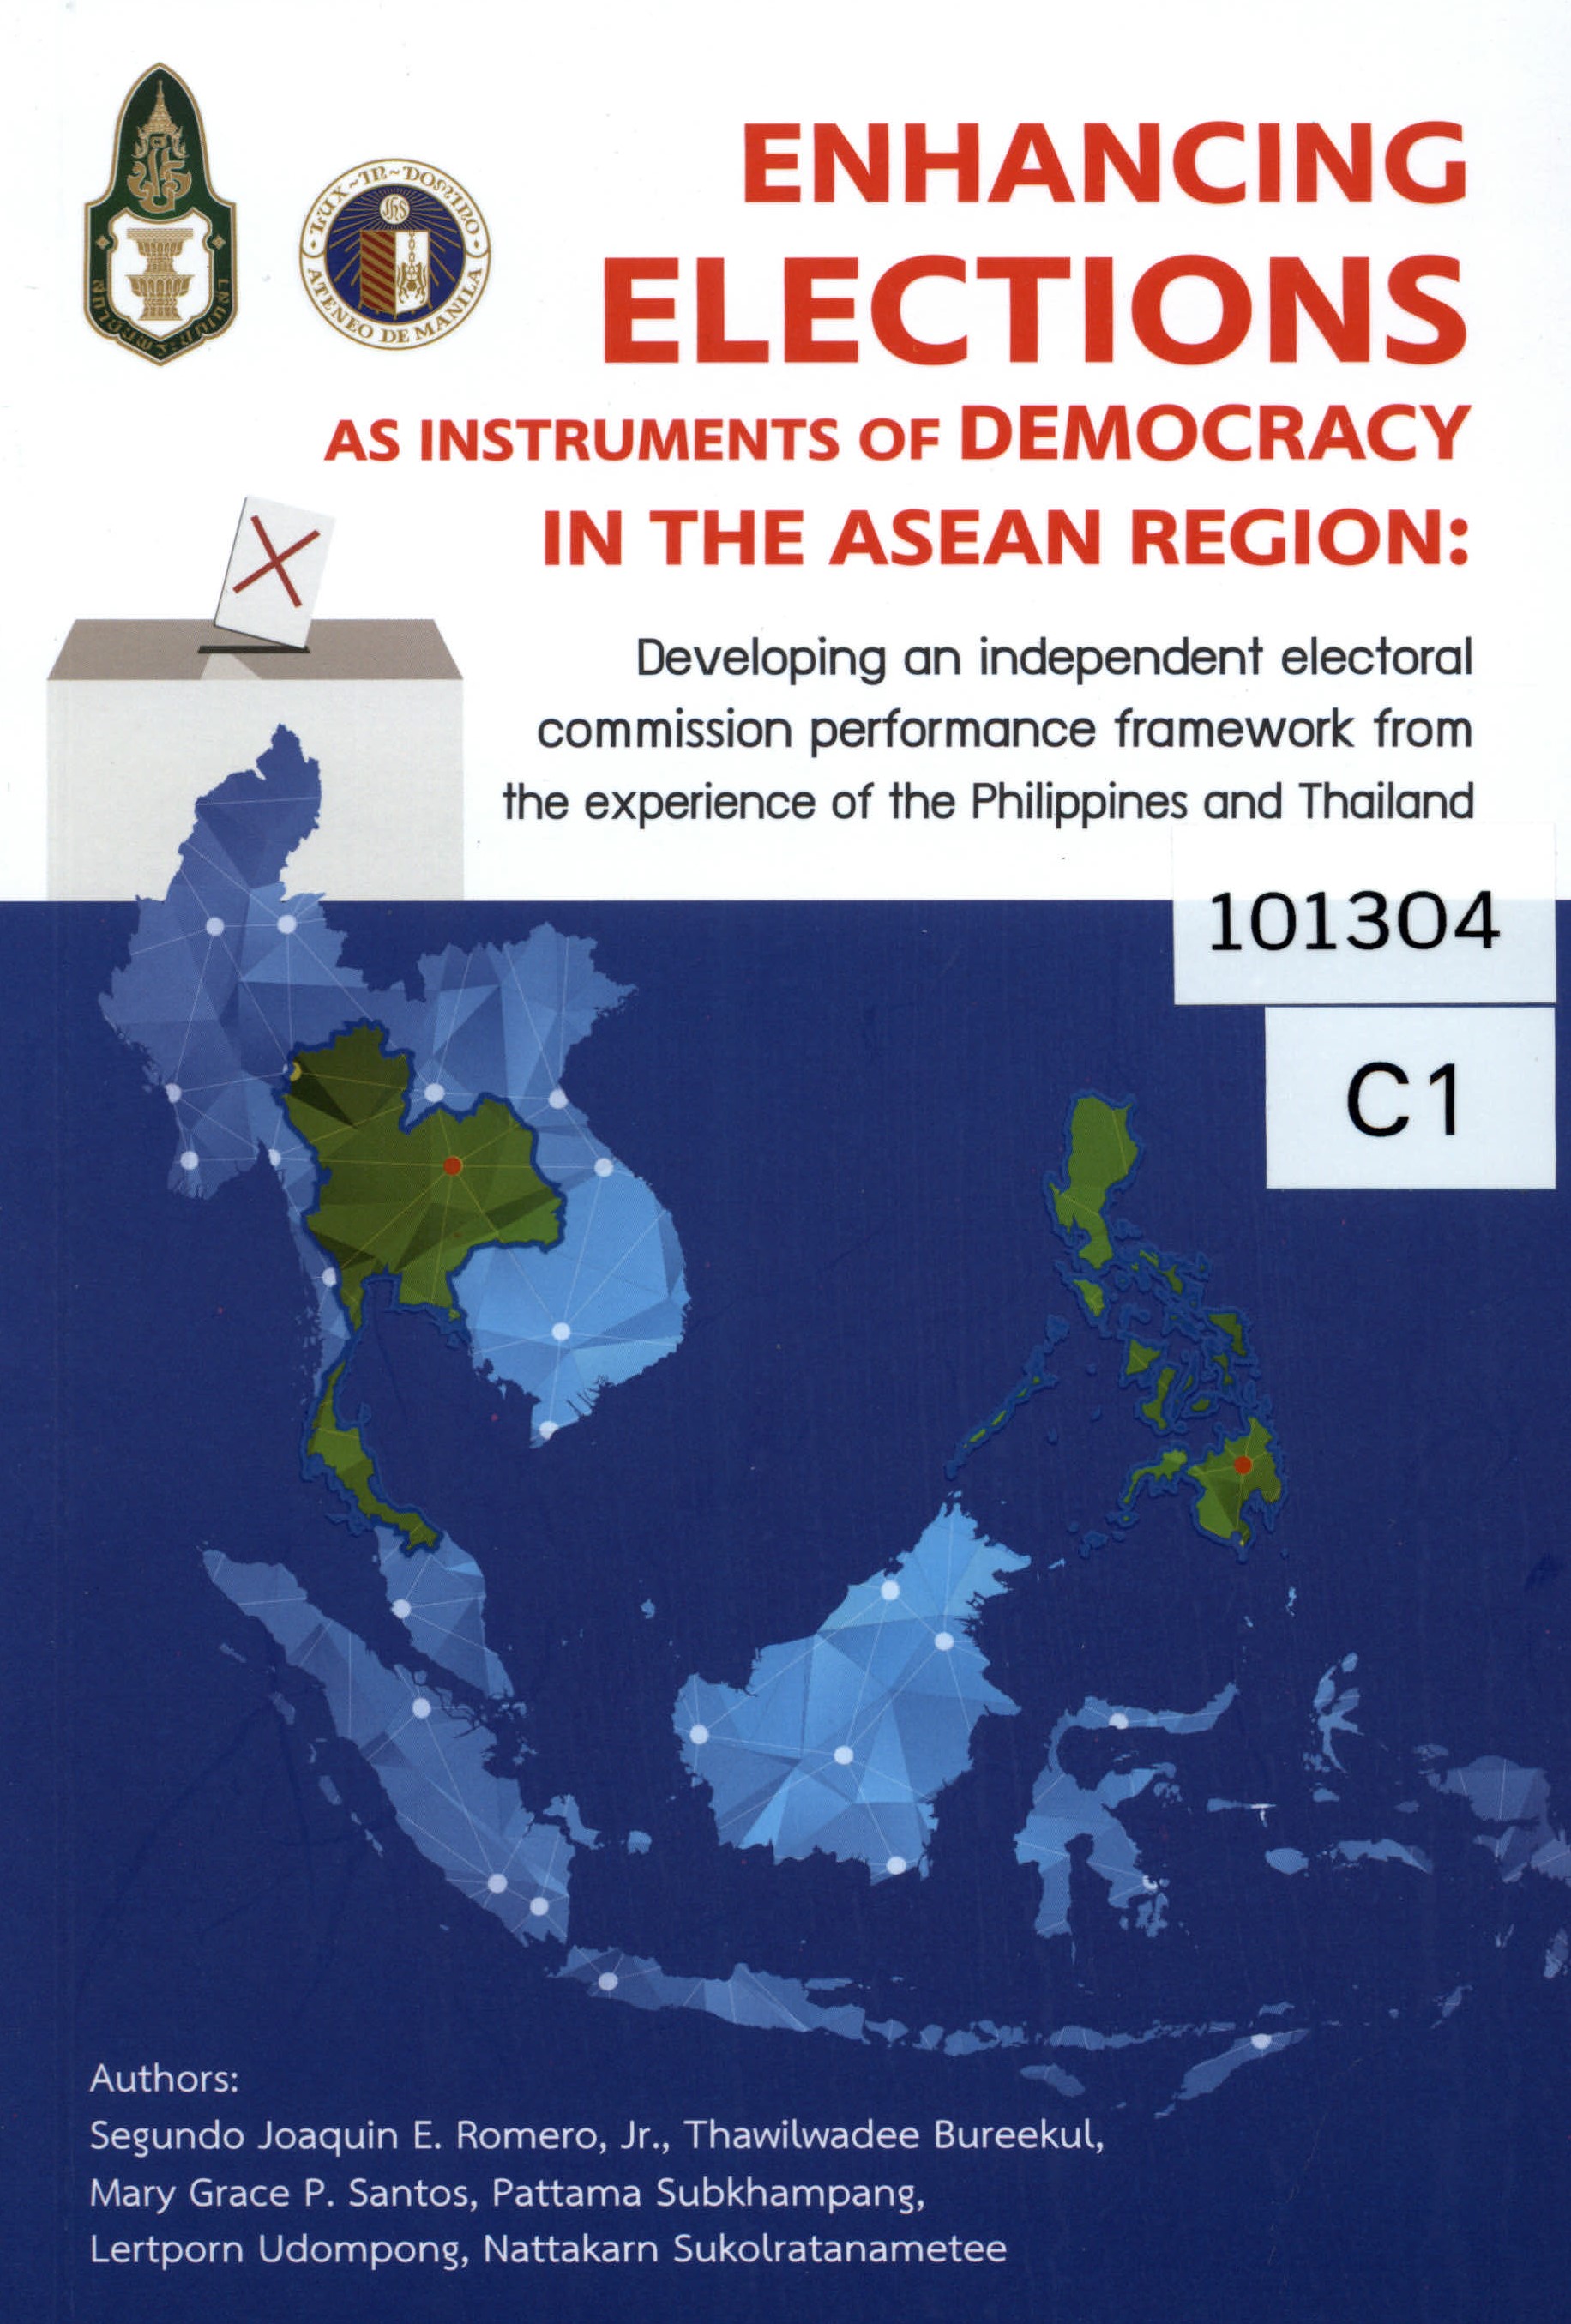 Enhancing elections as instruments of democracy in the ASEAN region: developing an independent electoral commission performance framework from the experience of the Philippines and Thailand